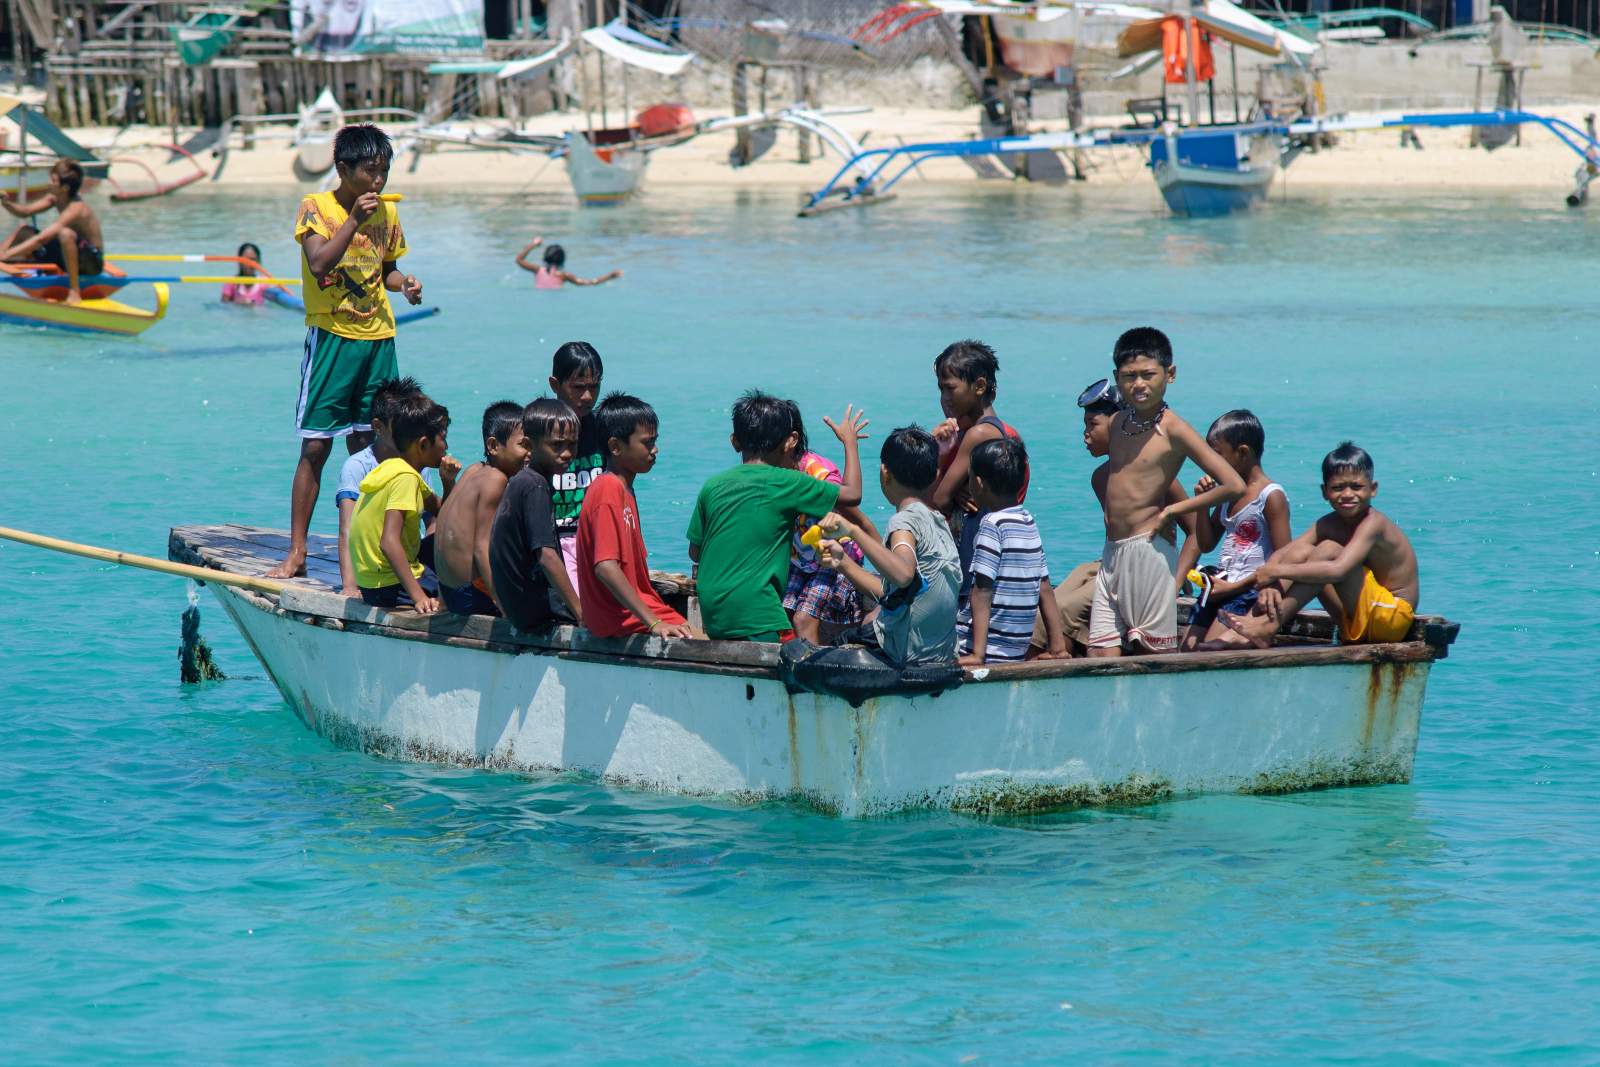 Cagbalete Island children on a boat